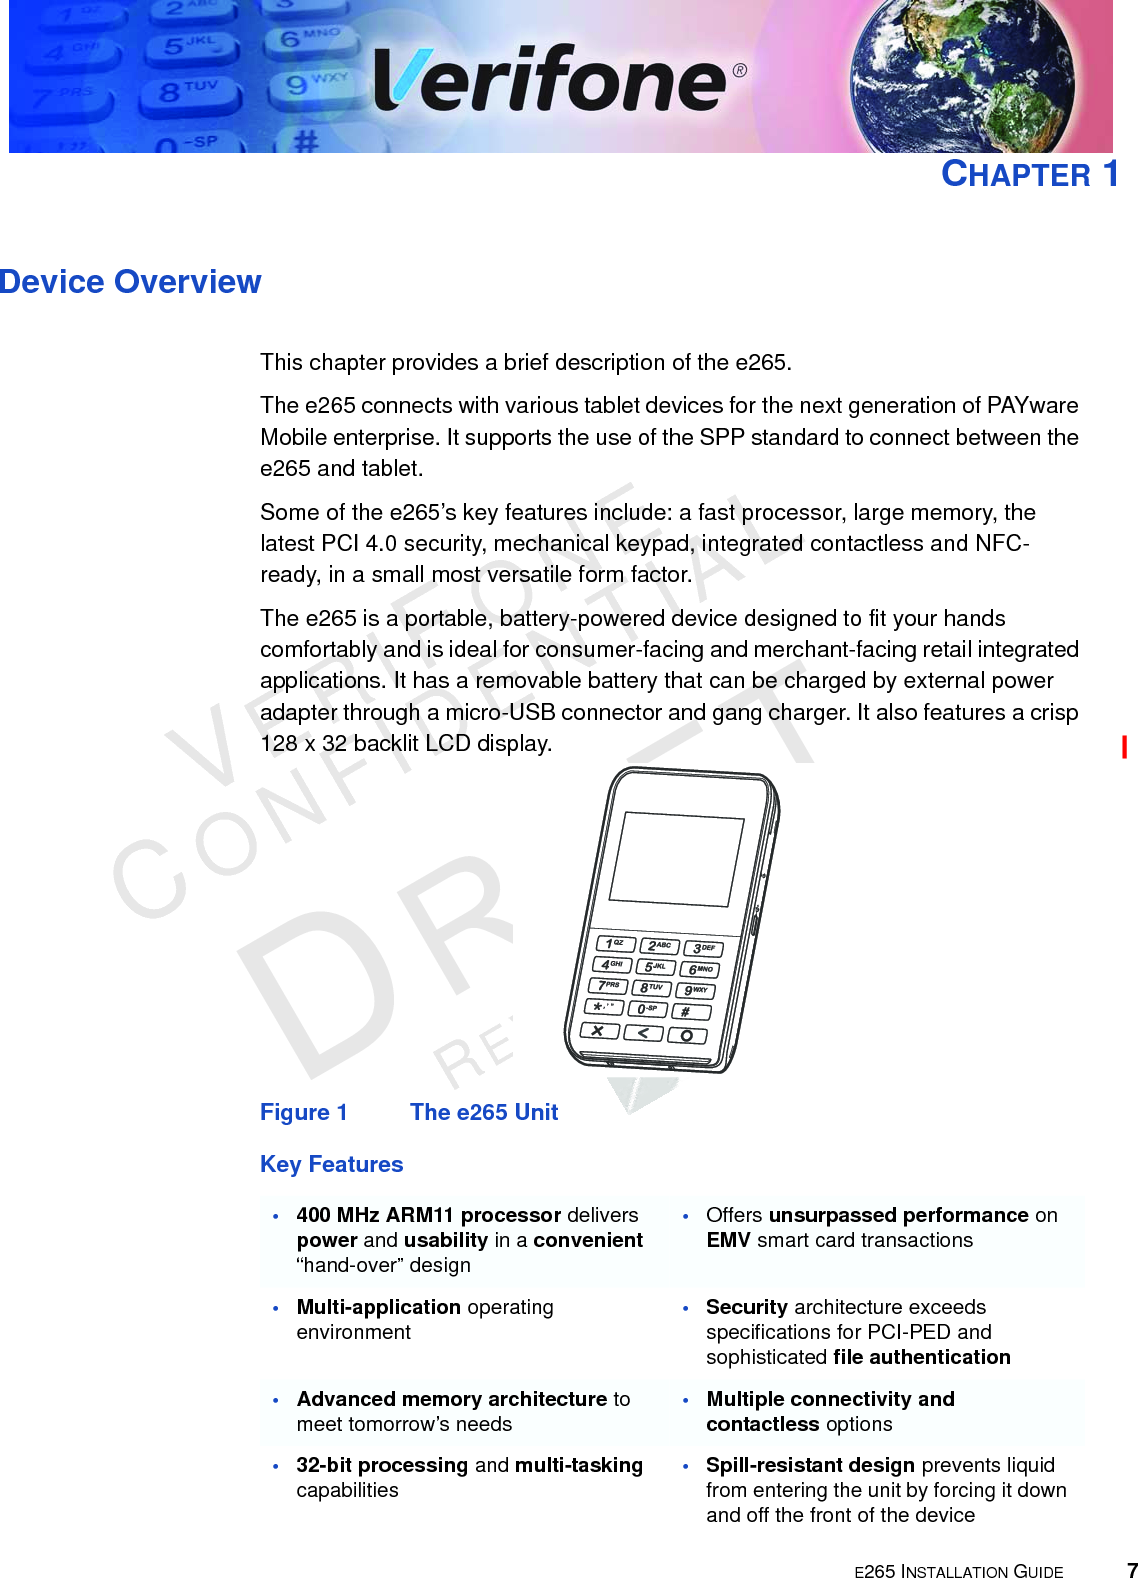 E265 INSTALLATION GUIDE 7VERIFONECONFIDENTIALREVISION A.6 CHAPTER 1Device OverviewThis chapter provides a brief description of the e265.The e265 connects with various tablet devices for the next generation of PAYware Mobile enterprise. It supports the use of the SPP standard to connect between the e265 and tablet.Some of the e265’s key features include: a fast processor, large memory, the latest PCI 4.0 security, mechanical keypad, integrated contactless and NFC-ready, in a small most versatile form factor.The e265 is a portable, battery-powered device designed to fit your hands comfortably and is ideal for consumer-facing and merchant-facing retail integrated applications. It has a removable battery that can be charged by external power adapter through a micro-USB connector and gang charger. It also features a crisp 128 x 32 backlit LCD display.Figure 1 The e265 UnitKey Features•400 MHz ARM11 processor delivers power and usability in a convenient “hand-over” design•Offers unsurpassed performance on EMV smart card transactions•Multi-application operating environment•Security architecture exceeds specifications for PCI-PED and sophisticated file authentication•Advanced memory architecture to meet tomorrow’s needs•Multiple connectivity and contactless options•32-bit processing and multi-tasking capabilities•Spill-resistant design prevents liquid from entering the unit by forcing it down and off the front of the device